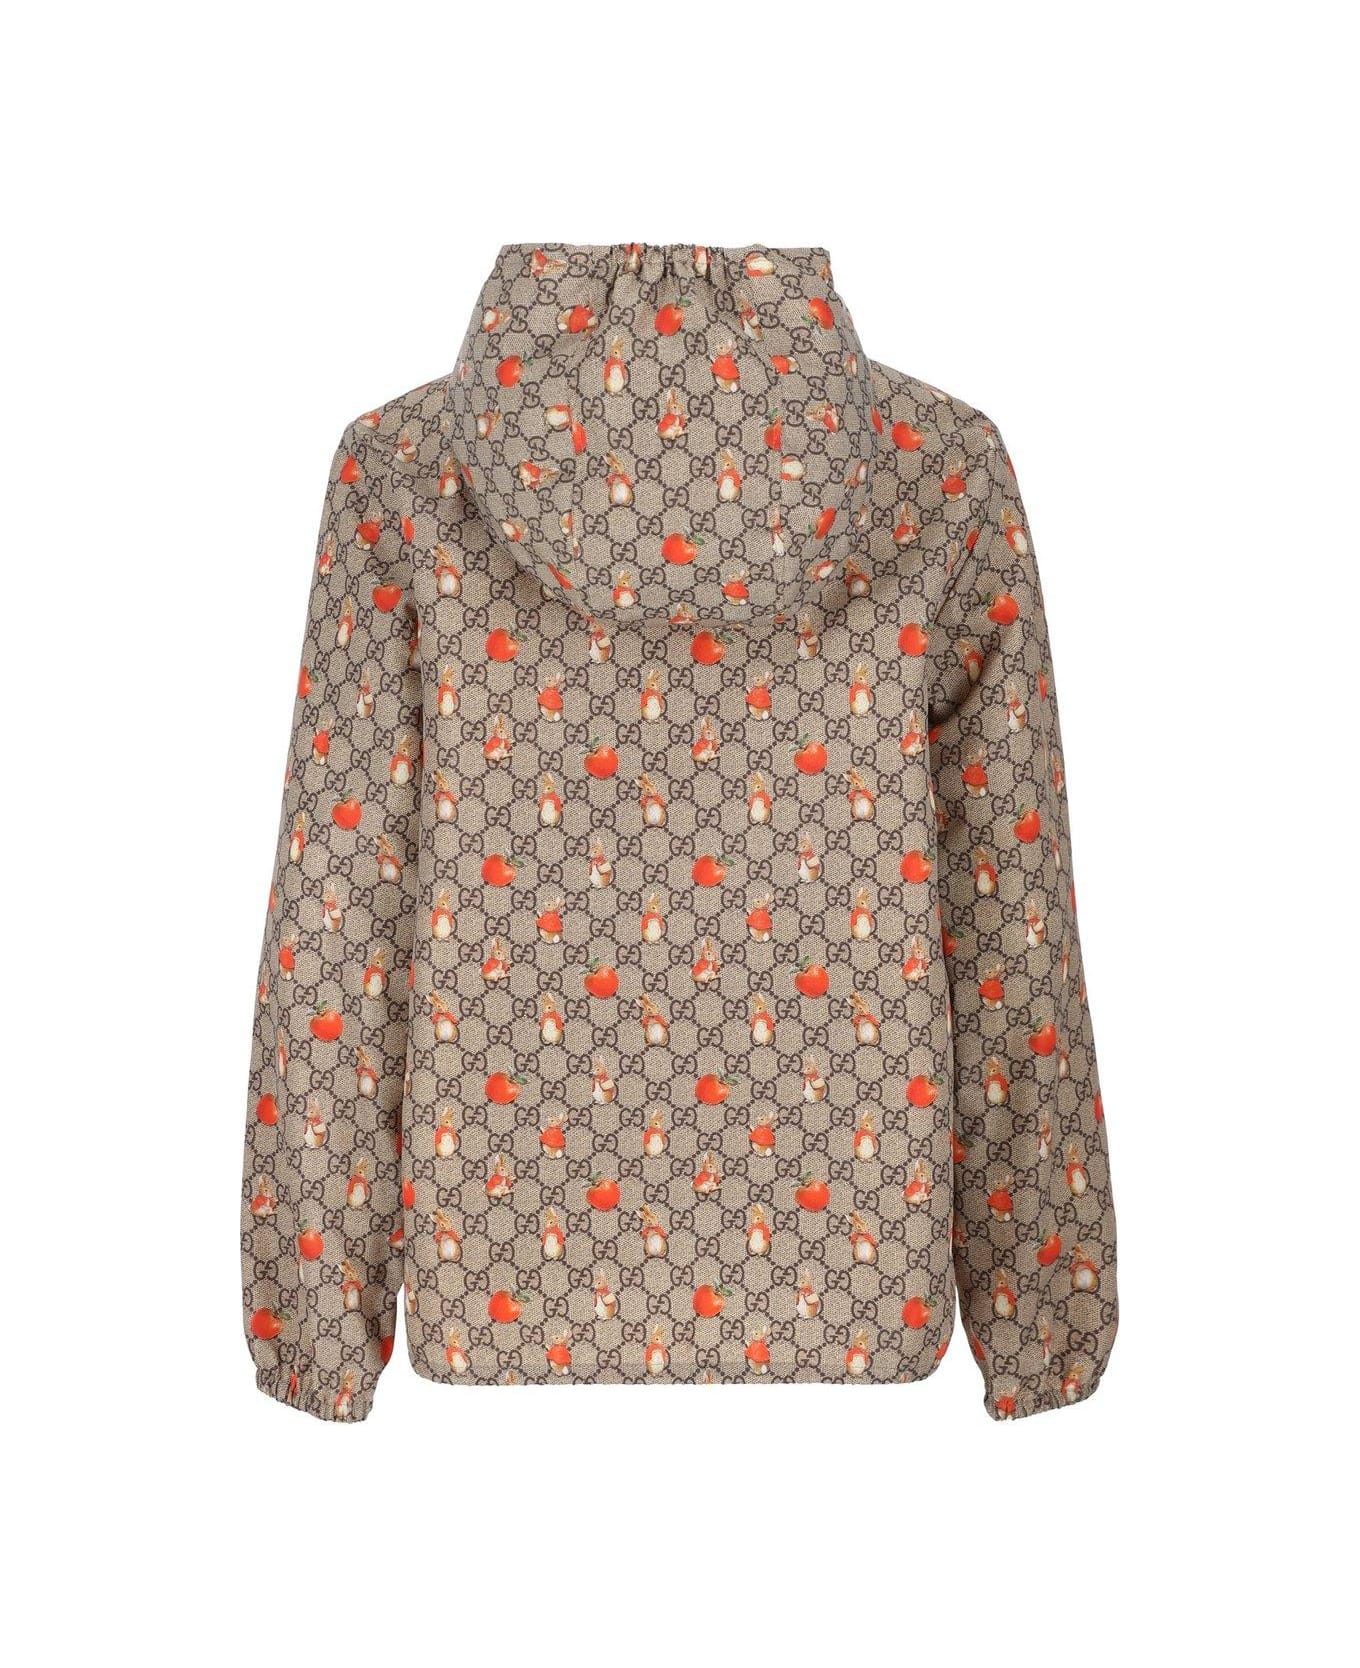 Gucci Allover Printed Hooded Jacket